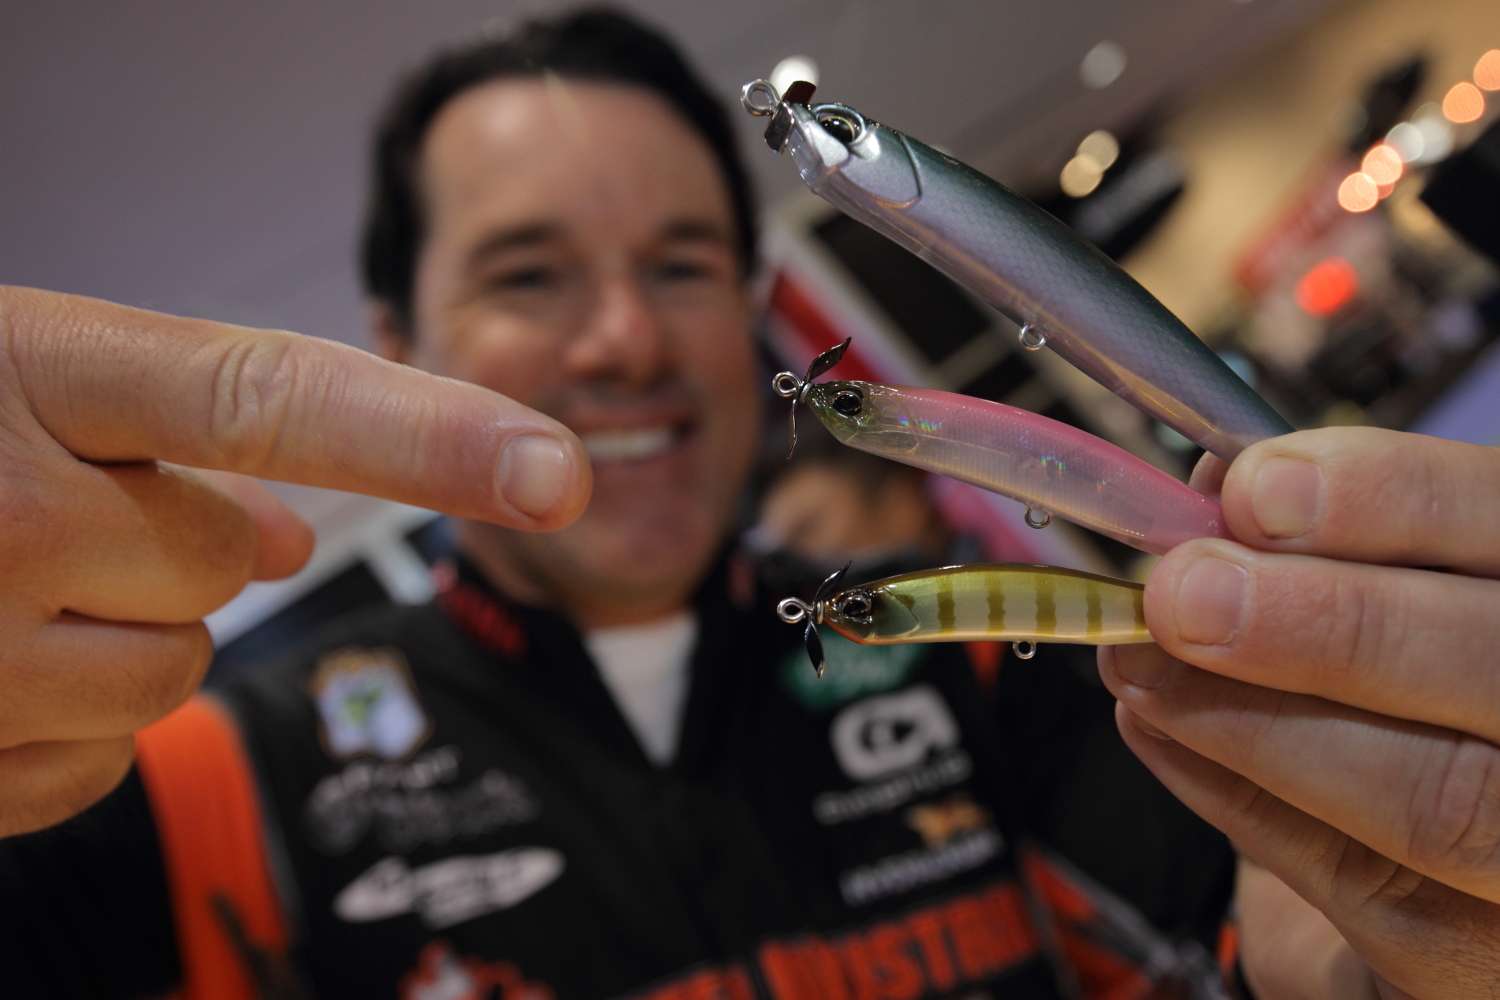 Grant Goldbeck shows new sizes of Spybaits at Duo.